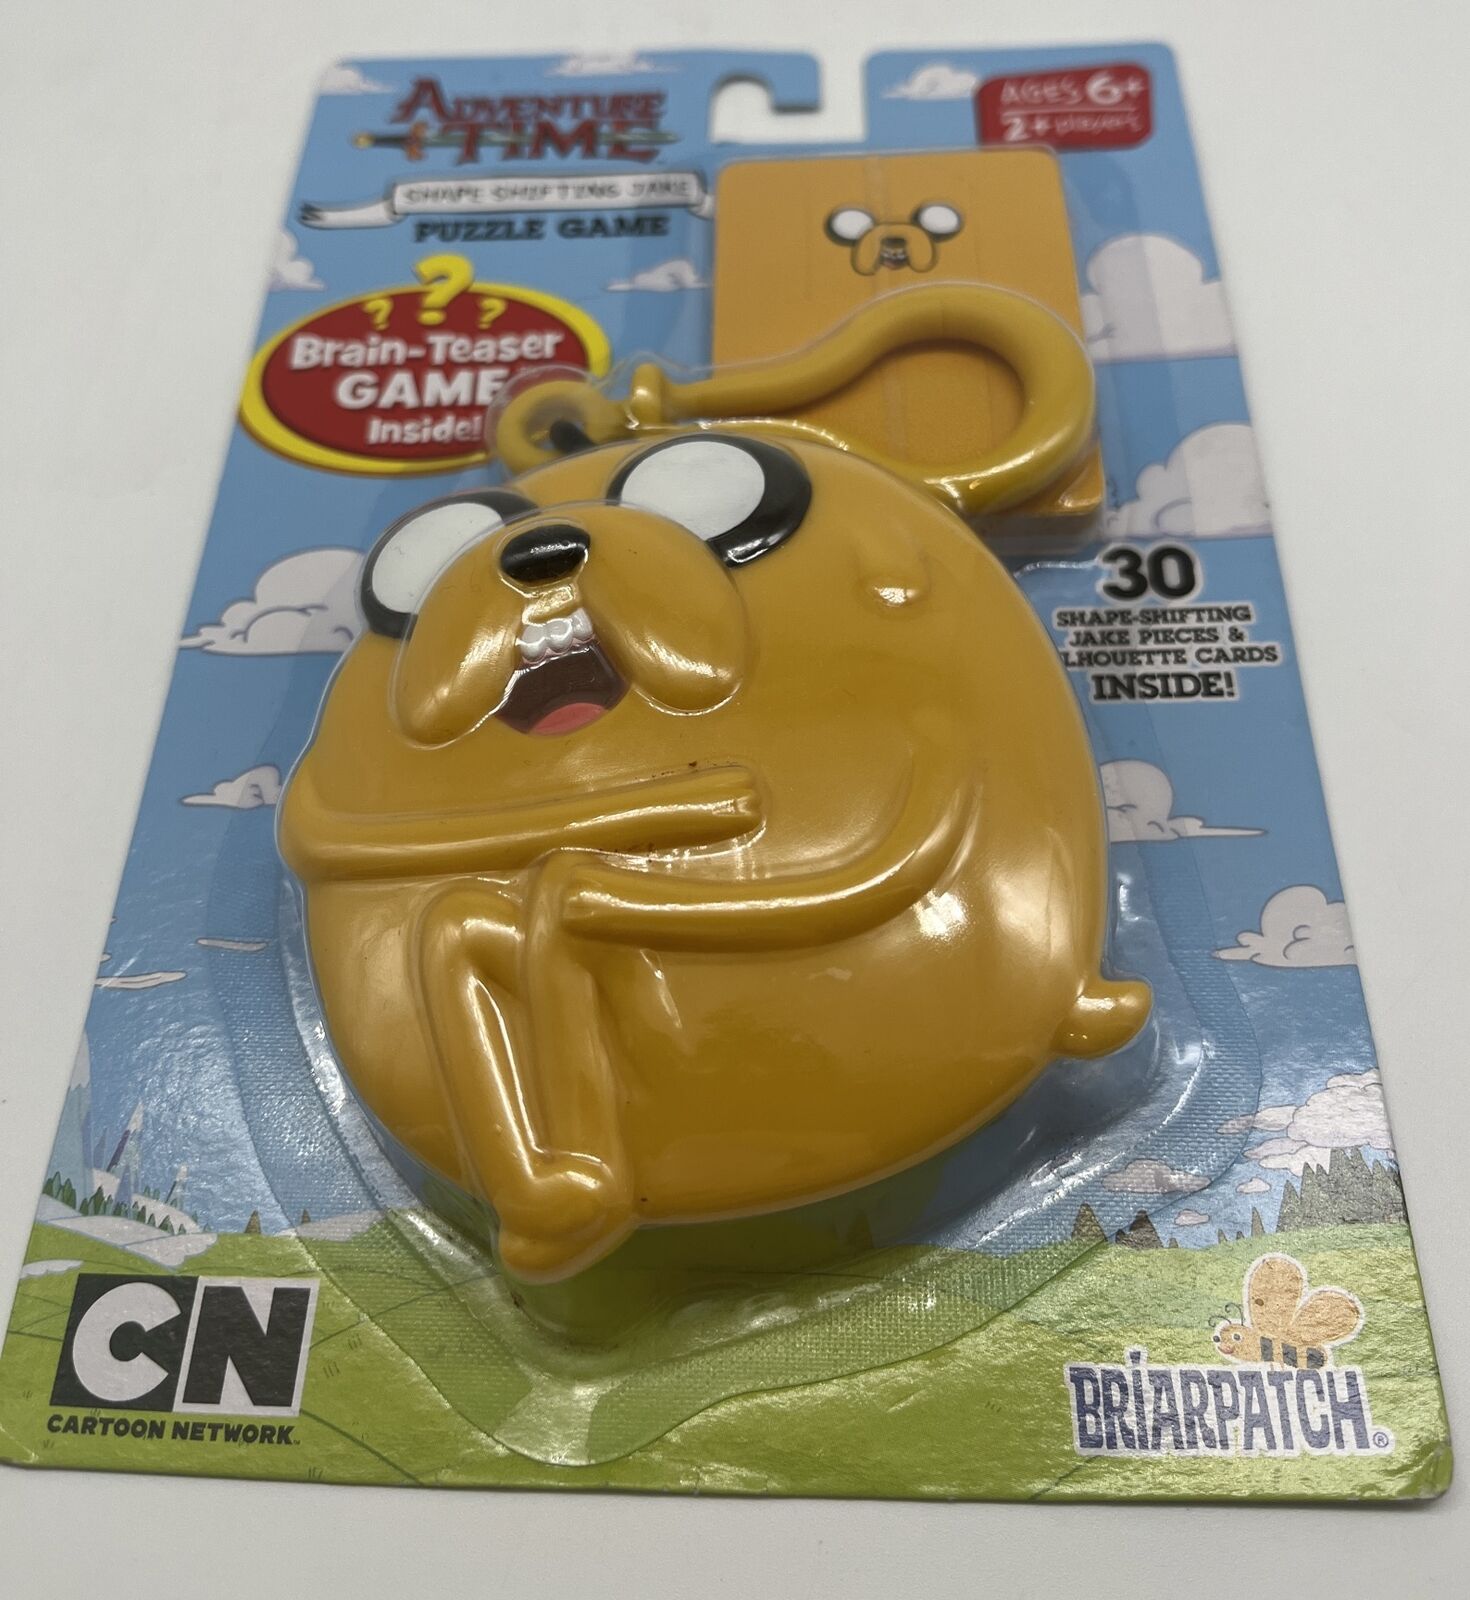 BRIARPATCH Cartoon Network Adventure Time Shape Shifting Jake Puzzle Game NEW